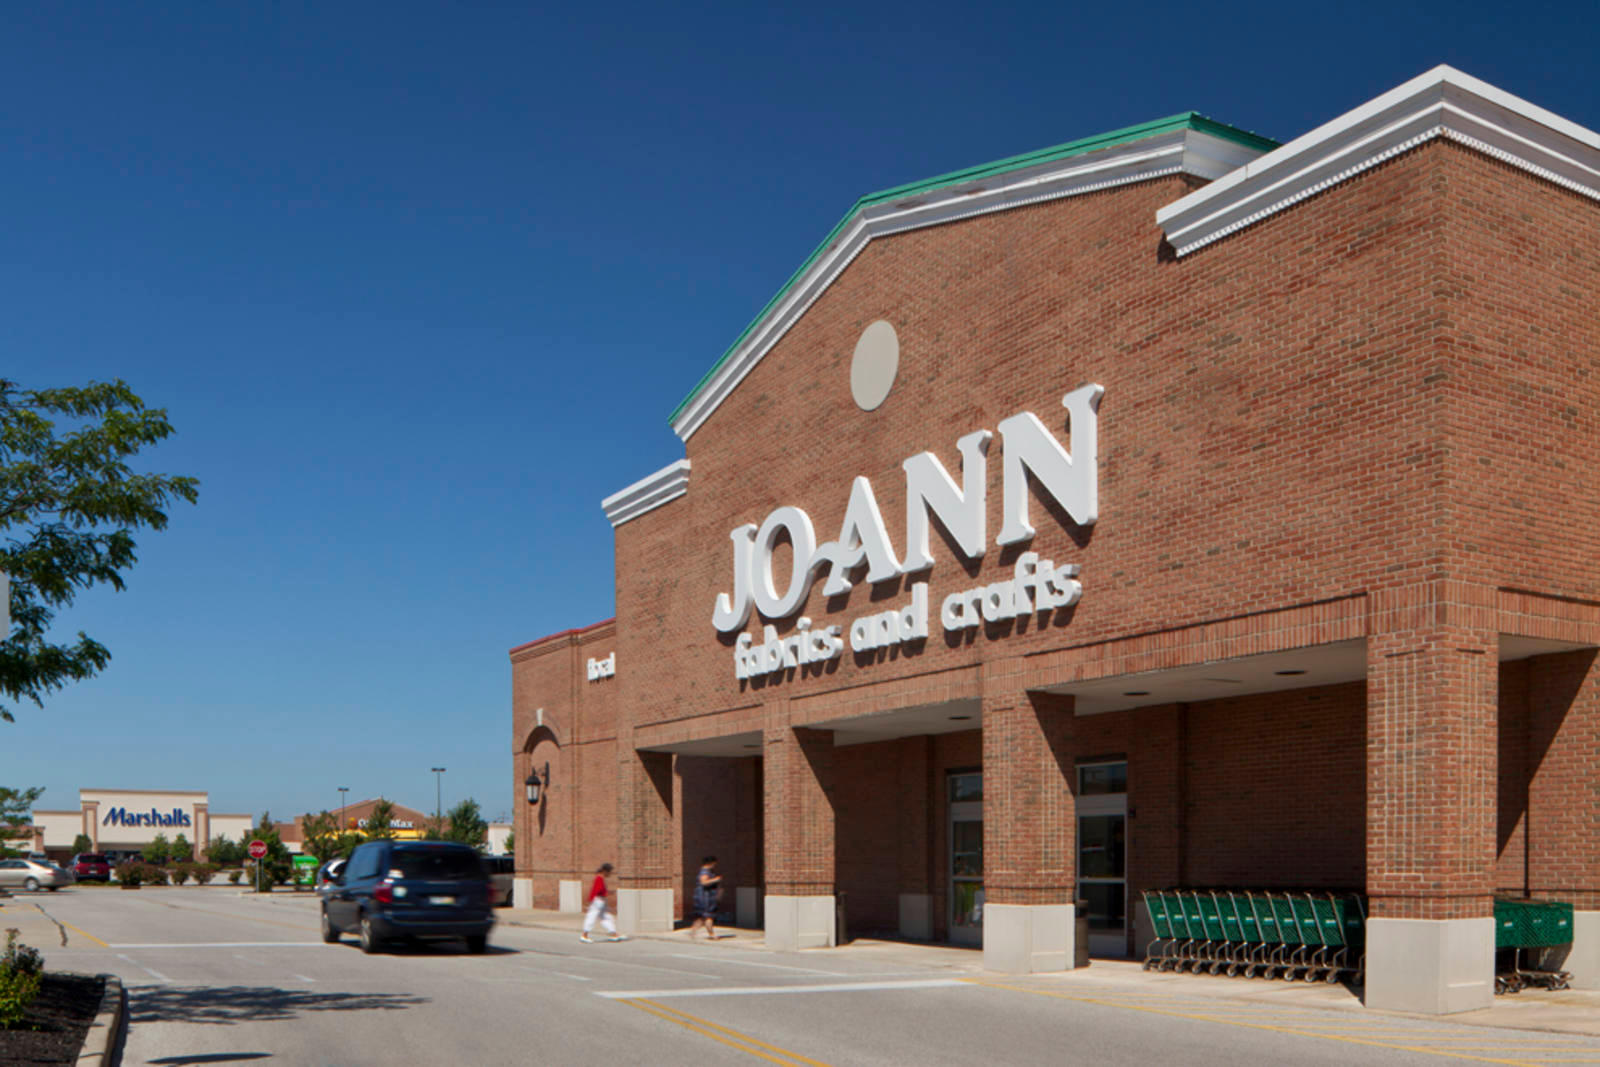 Joann Fabrics and Crafts at Southland Shopping Center